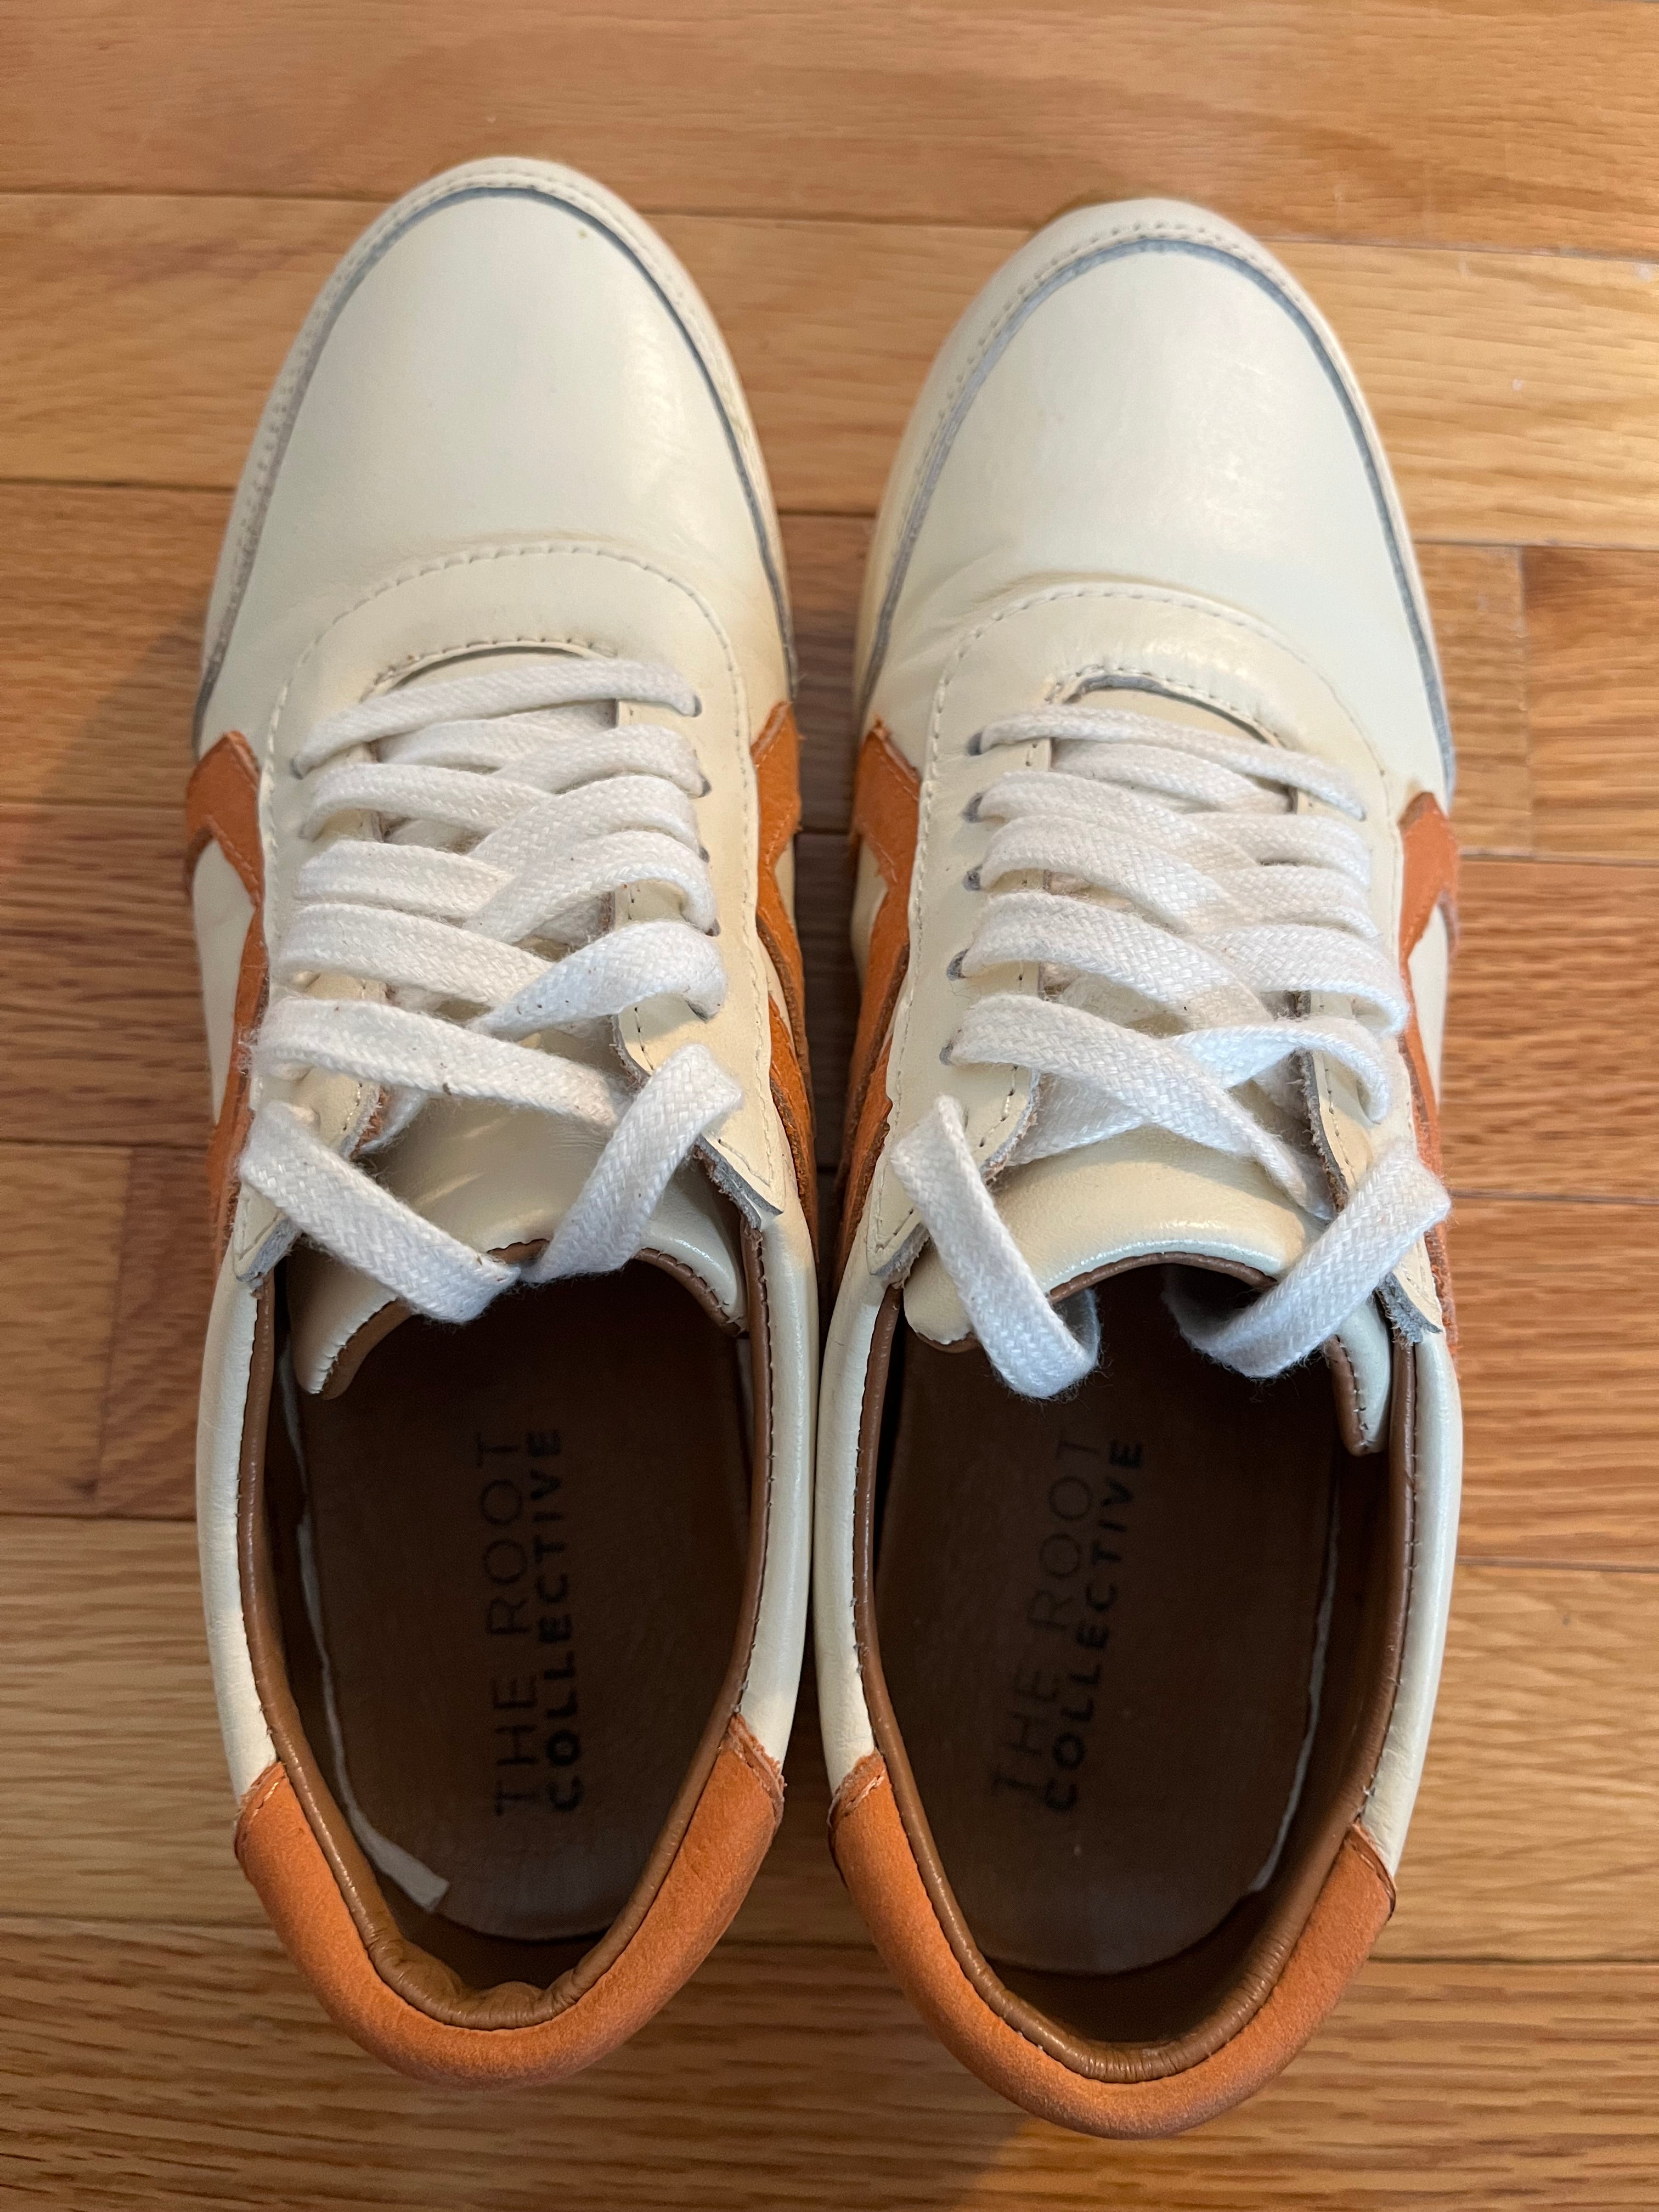 Jessie in Cream and Tangerine size 7 - Pre-loved